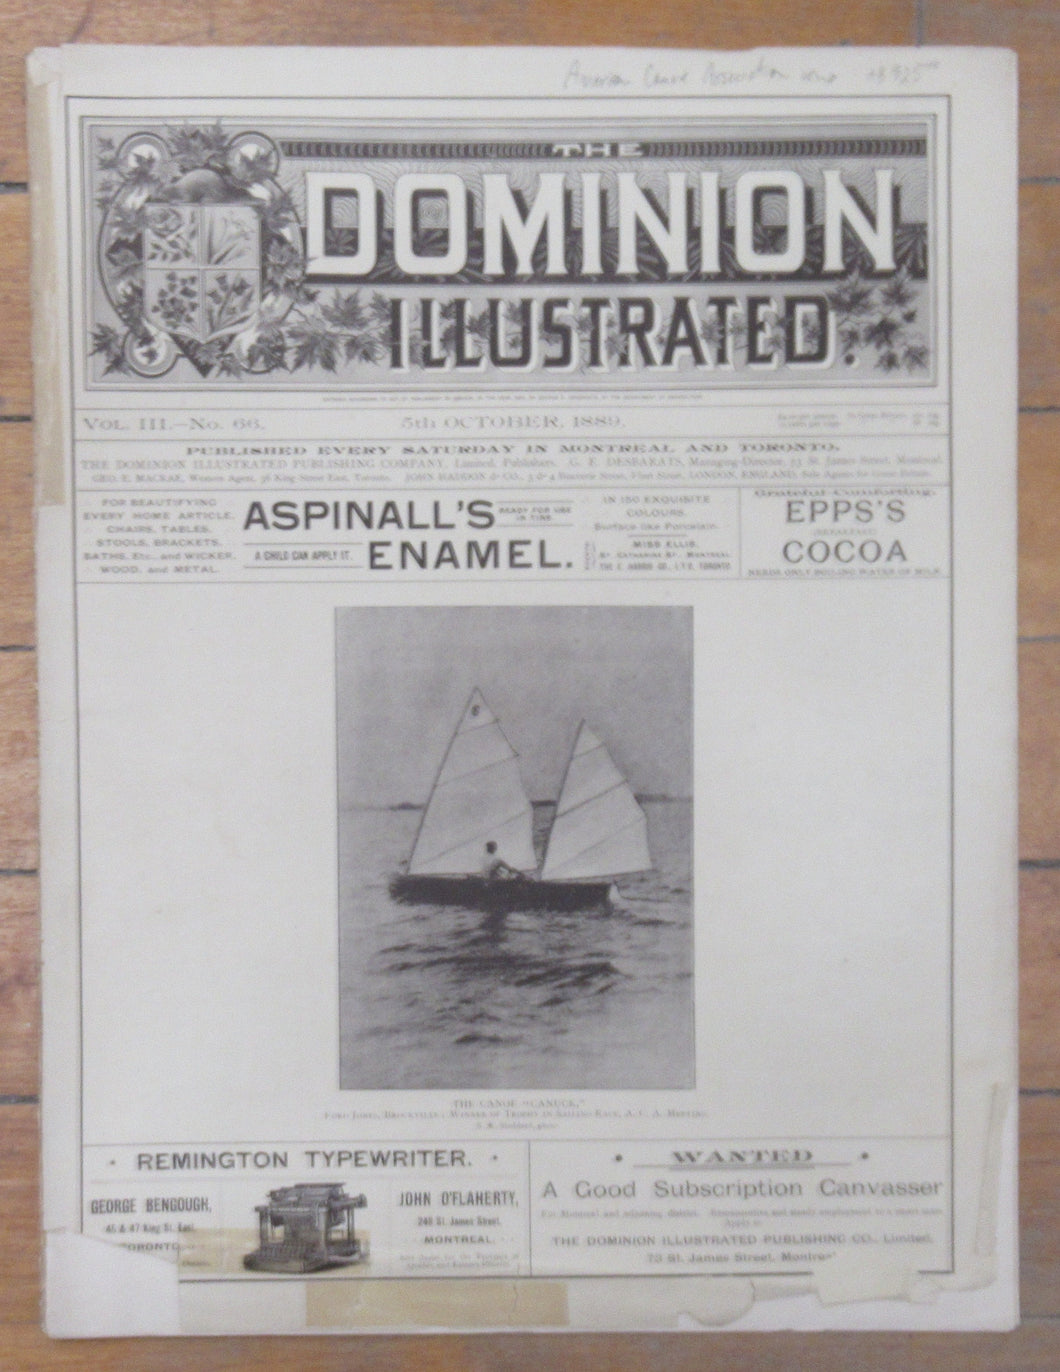 The Dominion Illustrated. 5th October, 1889